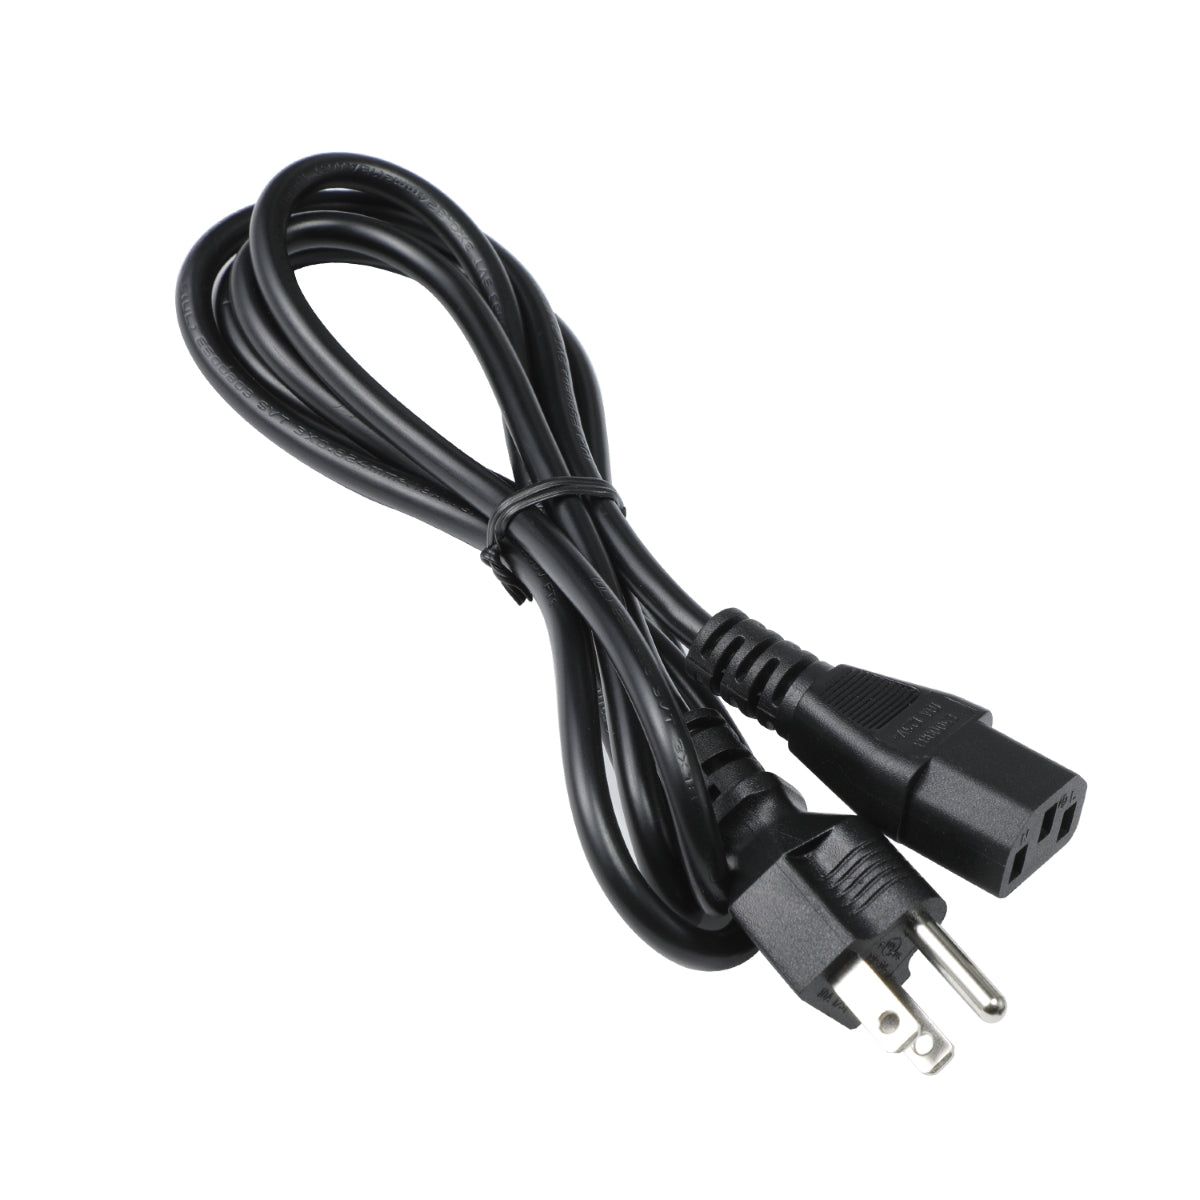 Power Cord for BenQ PD2720U IPS Monitor